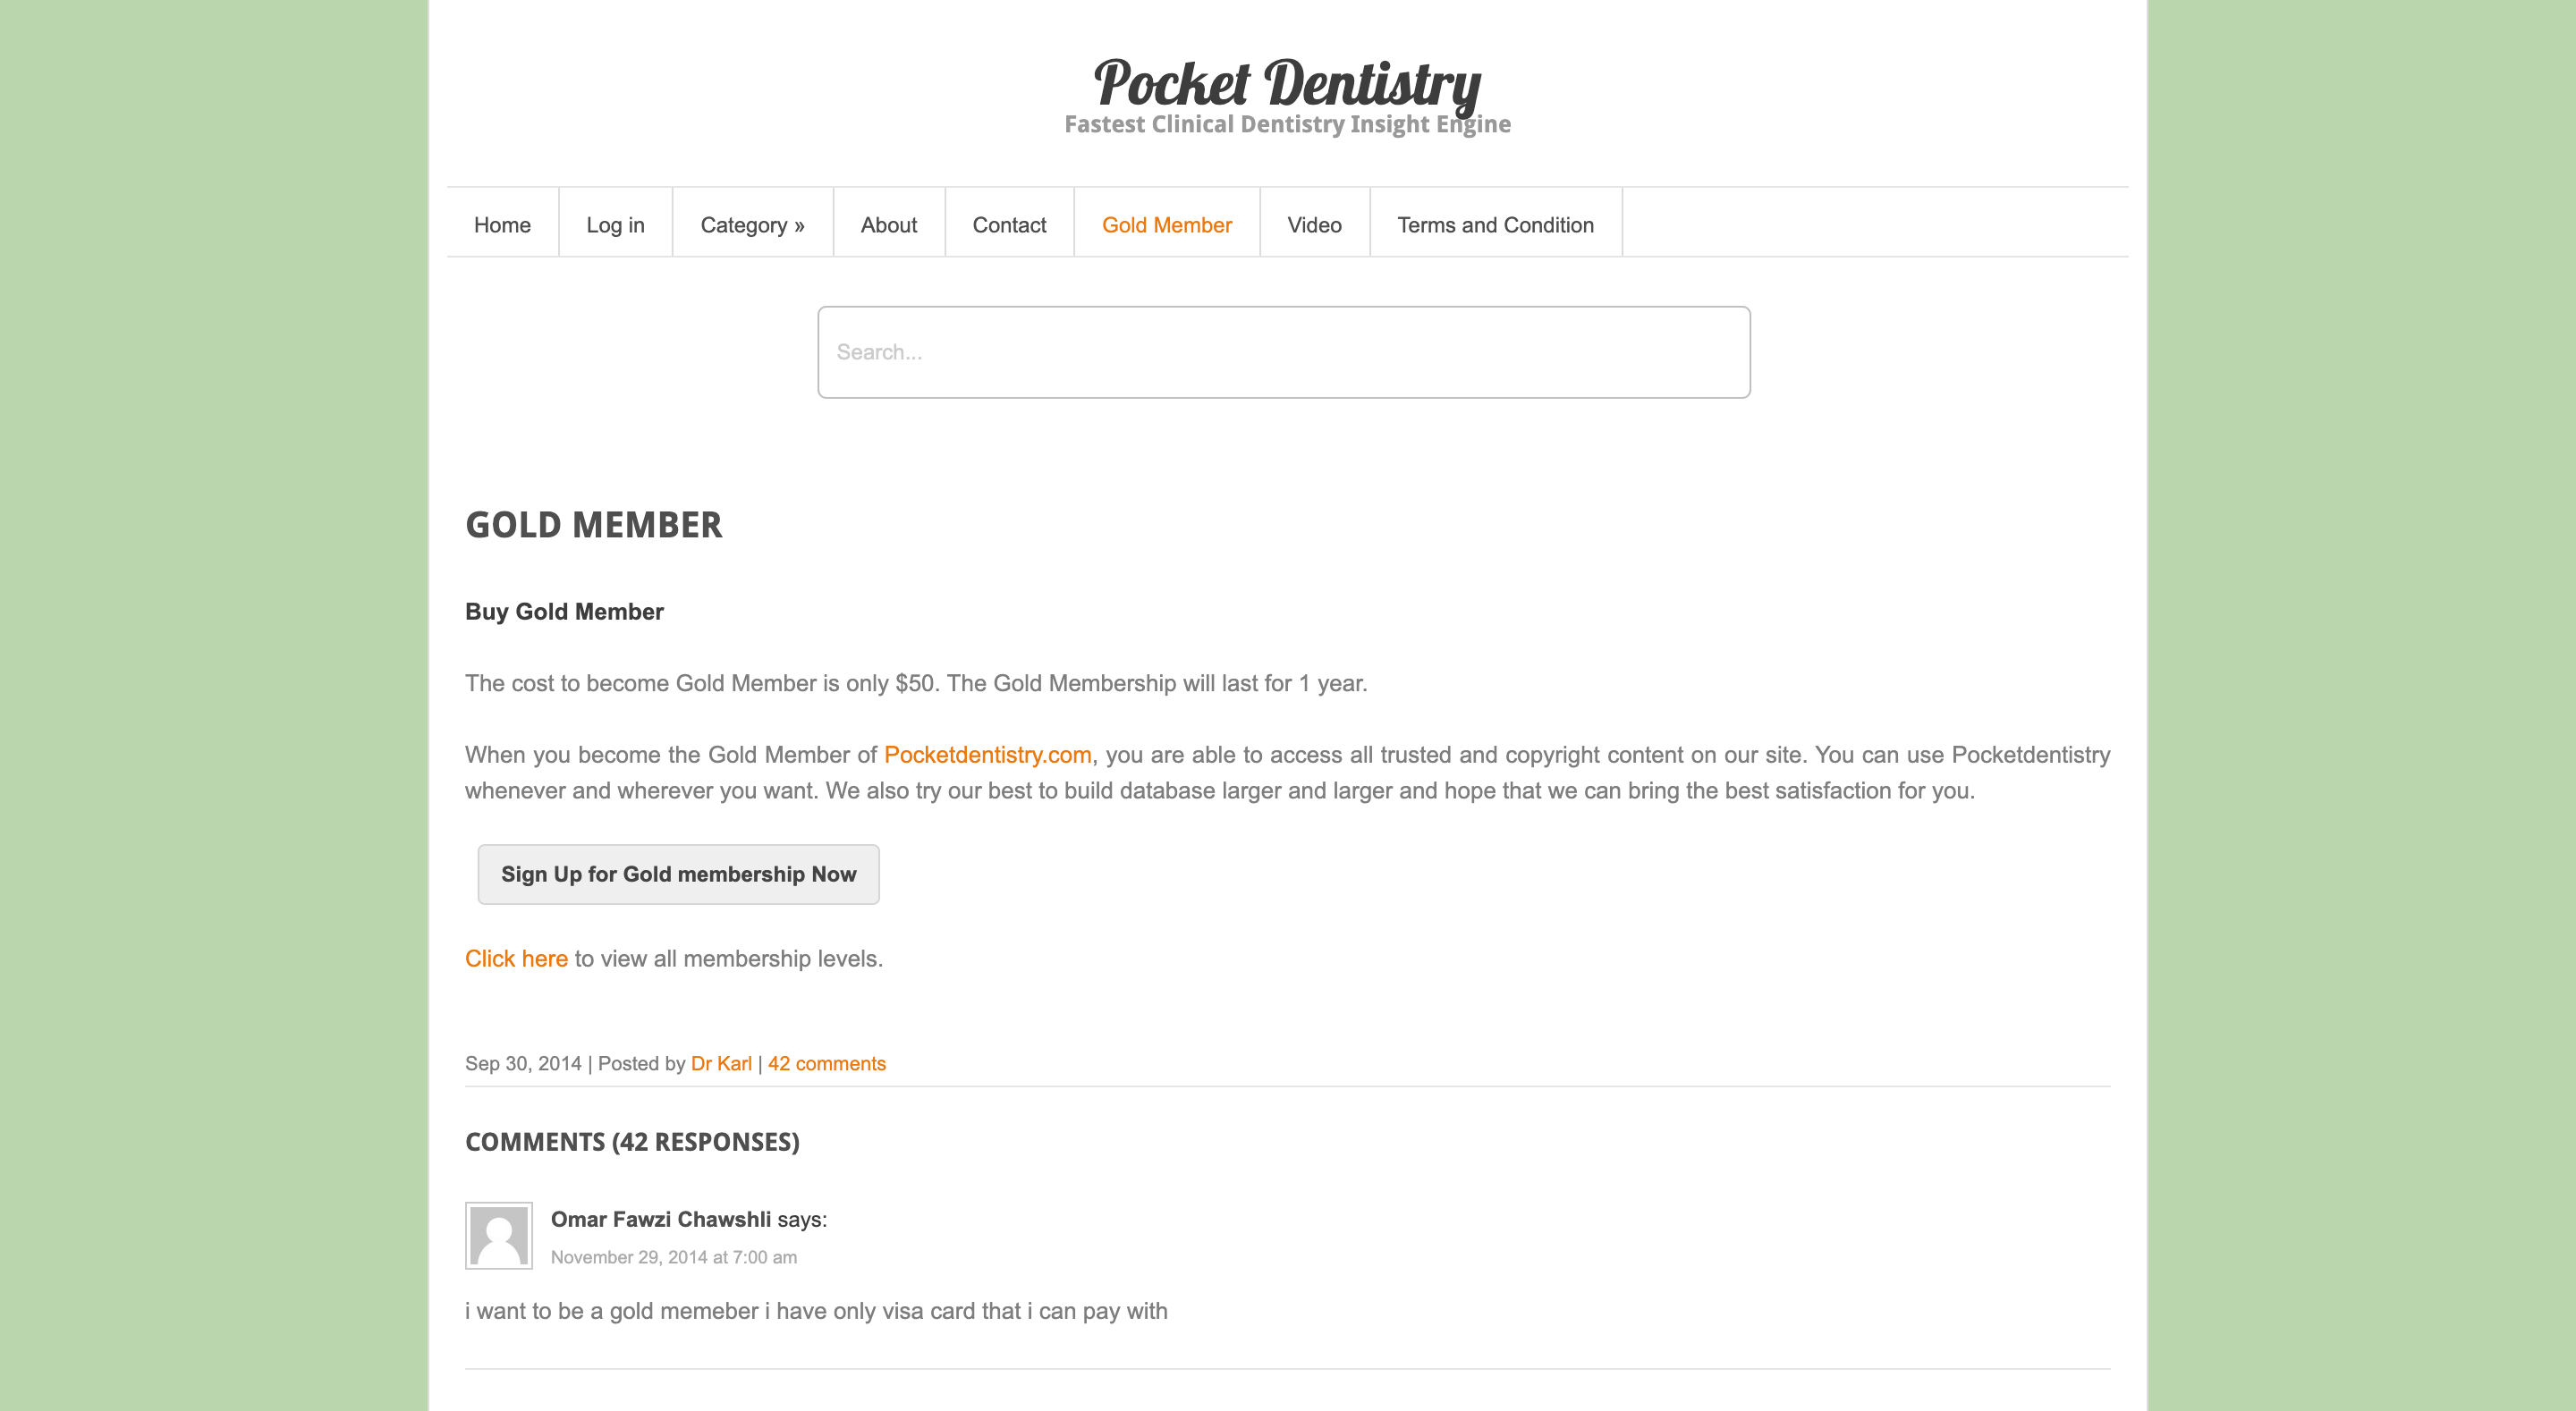 Pocket Dentistry Membership Levels and Pricing